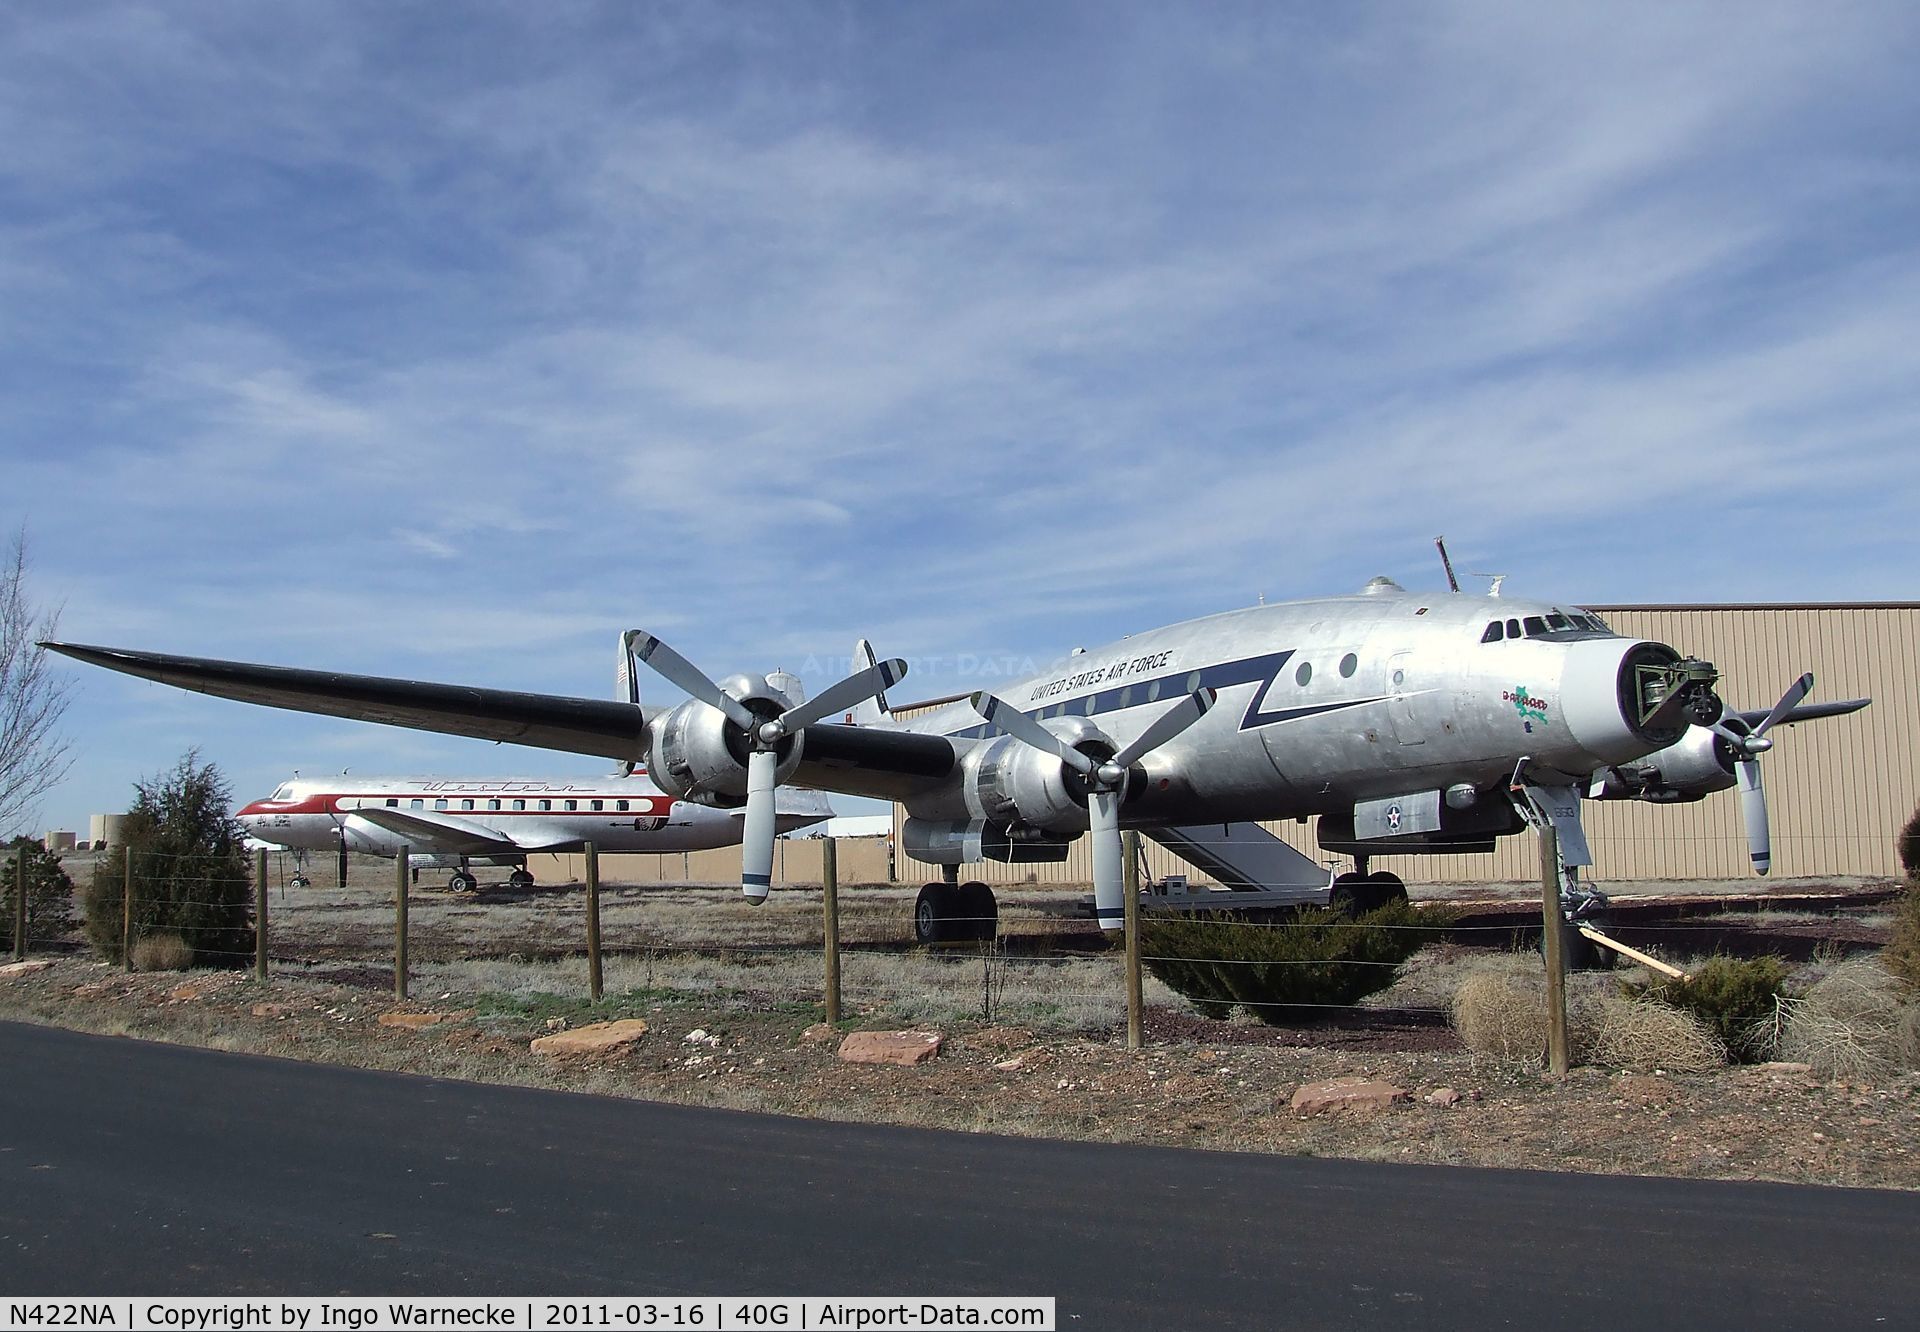 N422NA, 1948 Lockheed C-121A Constellation C/N 48-613 (2605), Lockheed VC-121A Constellation 'BATAAN' at the Planes of Fame Air Museum, Valle AZ